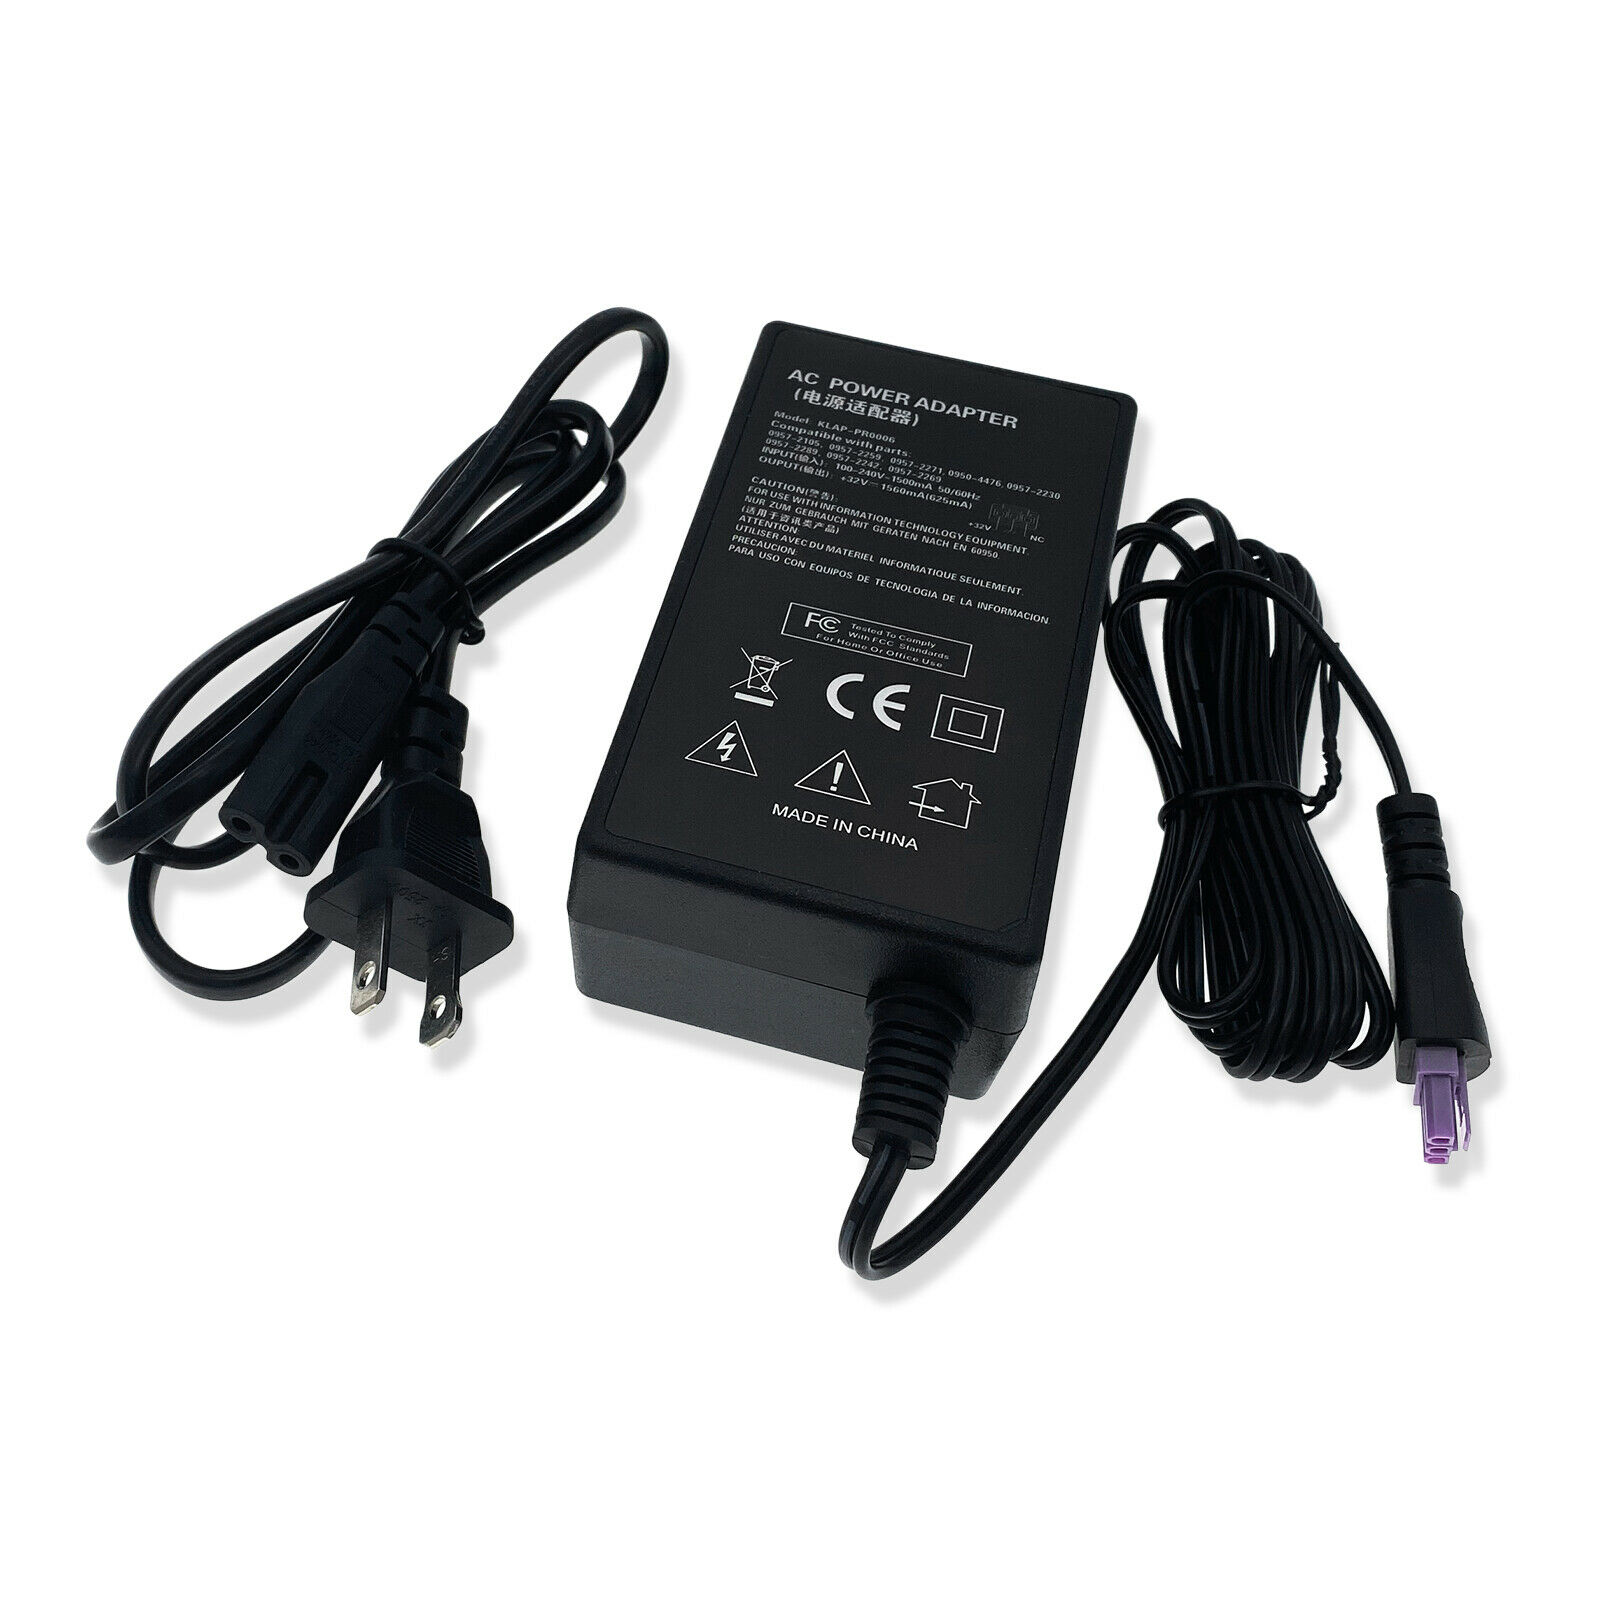 AC Adapter Charger For HP Photosmart Premium Fax C309 C309A Printer Power Supply Brand: Unbranded/Generic Compatible B - Click Image to Close